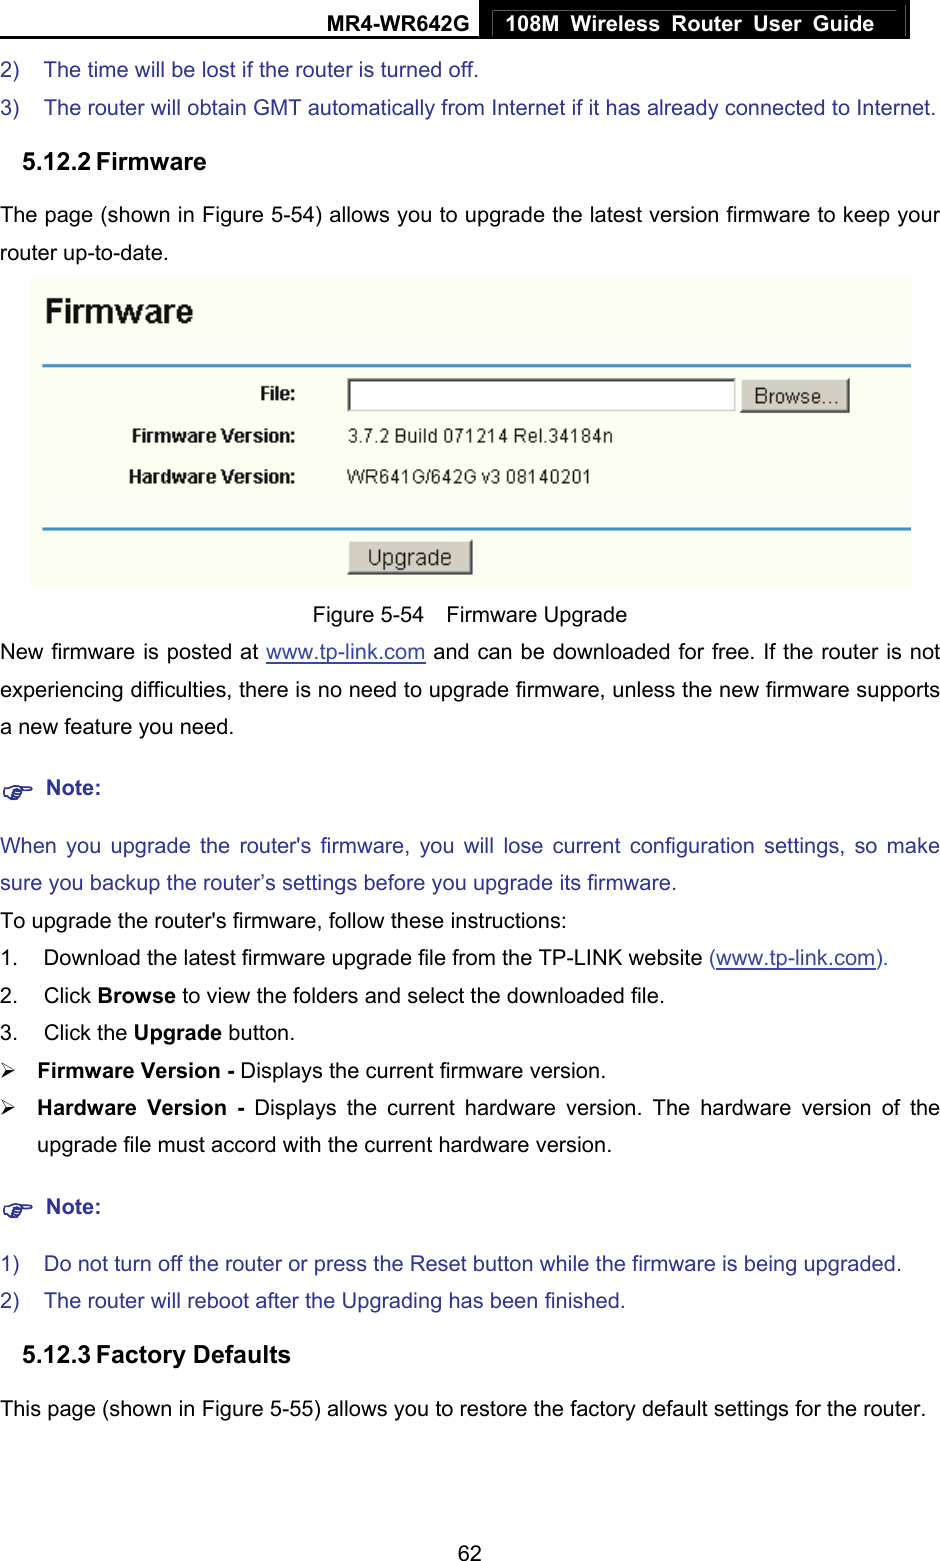 MR4-WR642G 108M Wireless Router User Guide   622)  The time will be lost if the router is turned off.   3)  The router will obtain GMT automatically from Internet if it has already connected to Internet. 5.12.2 Firmware The page (shown in Figure 5-54) allows you to upgrade the latest version firmware to keep your router up-to-date.  Figure 5-54  Firmware Upgrade New firmware is posted at www.tp-link.com and can be downloaded for free. If the router is not experiencing difficulties, there is no need to upgrade firmware, unless the new firmware supports a new feature you need. ) Note: When you upgrade the router&apos;s firmware, you will lose current configuration settings, so make sure you backup the router’s settings before you upgrade its firmware. To upgrade the router&apos;s firmware, follow these instructions: 1.  Download the latest firmware upgrade file from the TP-LINK website (www.tp-link.com).  2. Click Browse to view the folders and select the downloaded file.   3. Click the Upgrade button.   ¾ Firmware Version - Displays the current firmware version. ¾ Hardware Version - Displays the current hardware version. The hardware version of the upgrade file must accord with the current hardware version. ) Note: 1)  Do not turn off the router or press the Reset button while the firmware is being upgraded. 2)  The router will reboot after the Upgrading has been finished. 5.12.3 Factory Defaults This page (shown in Figure 5-55) allows you to restore the factory default settings for the router. 